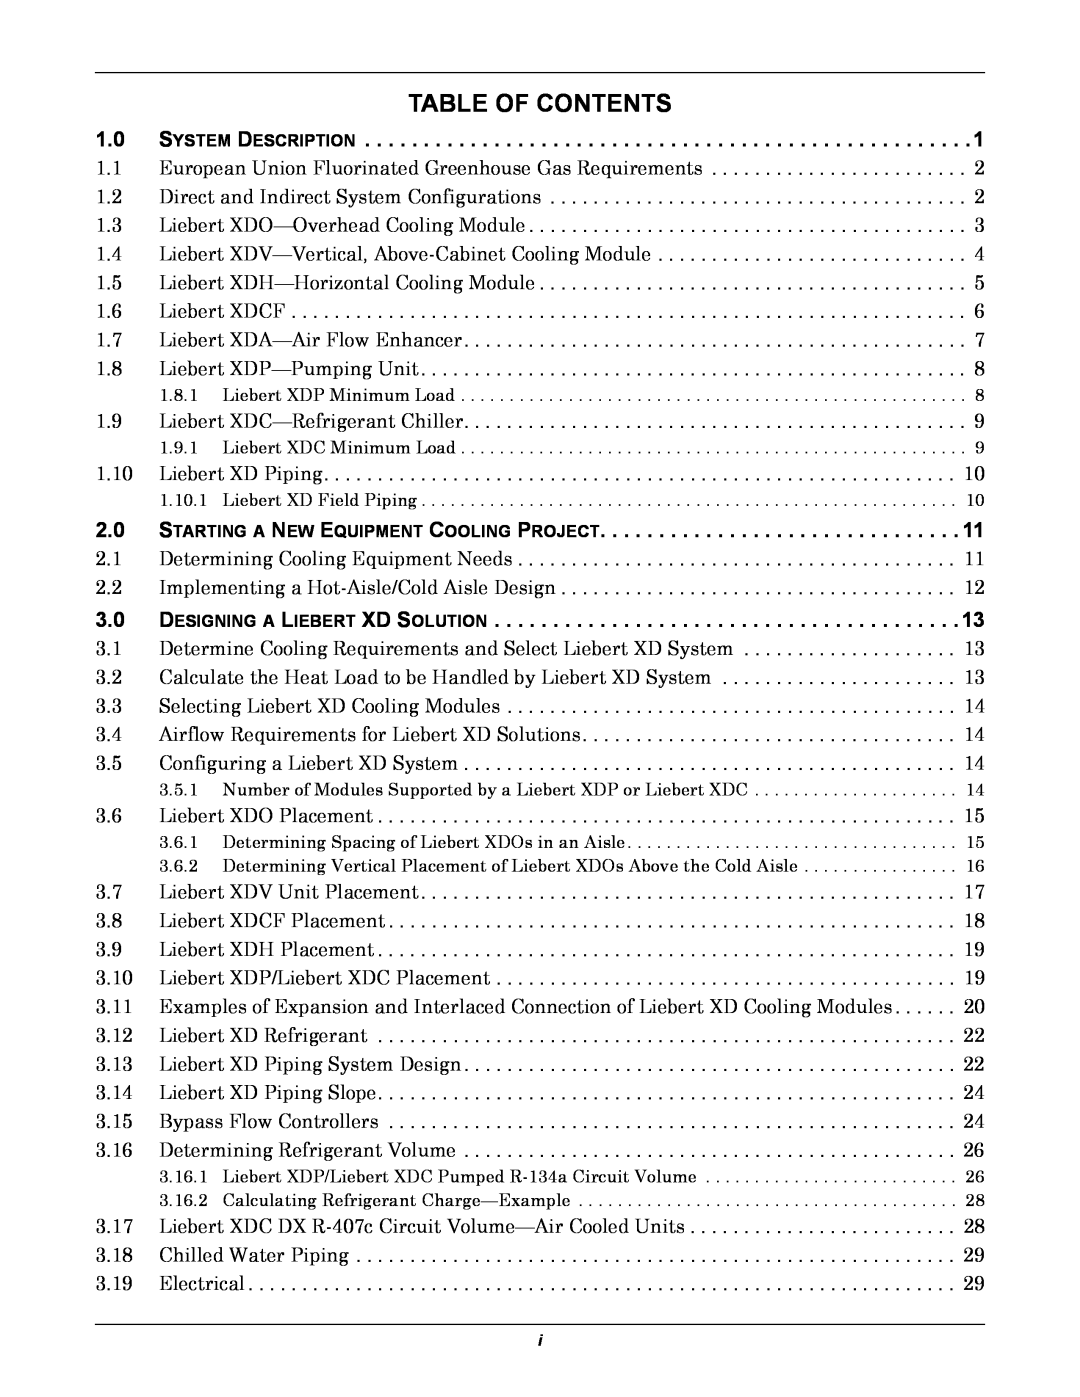 Emerson Xtreme Density manual Table Of Contents, System Description 